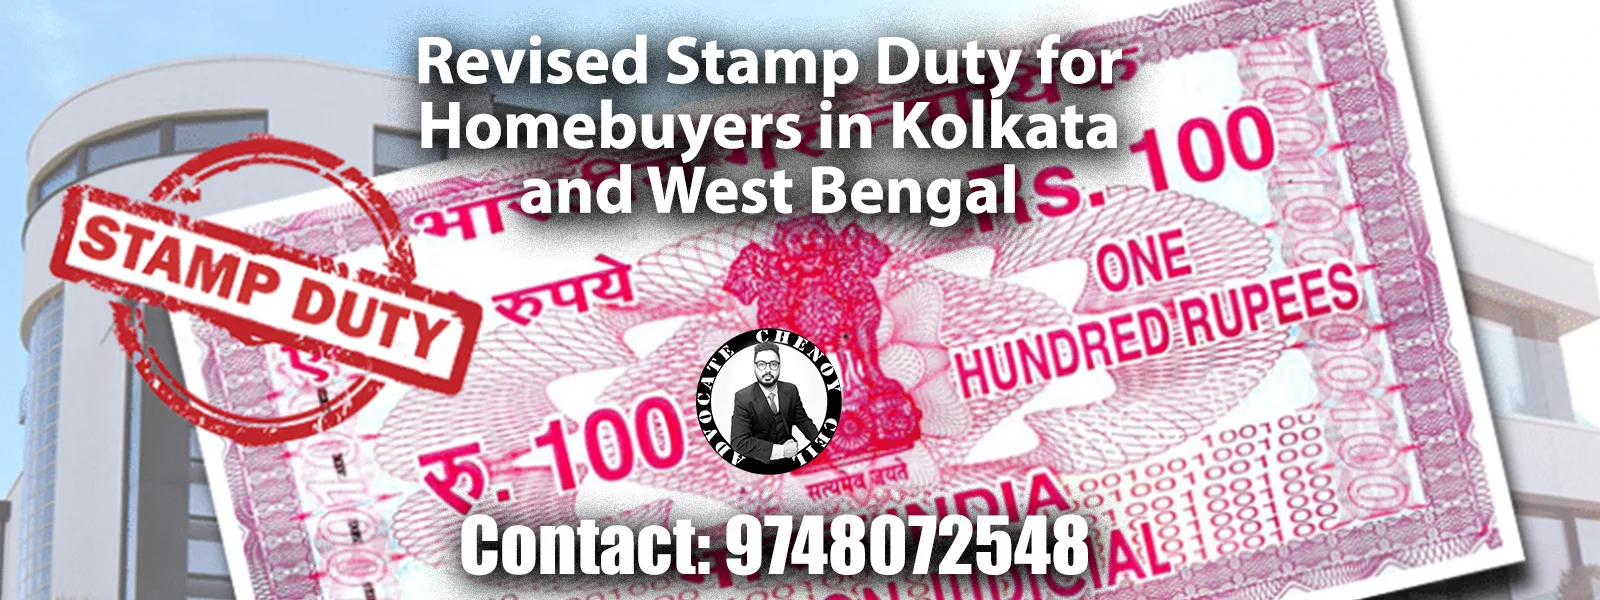 Revised Stamp Duty for Homebuyers